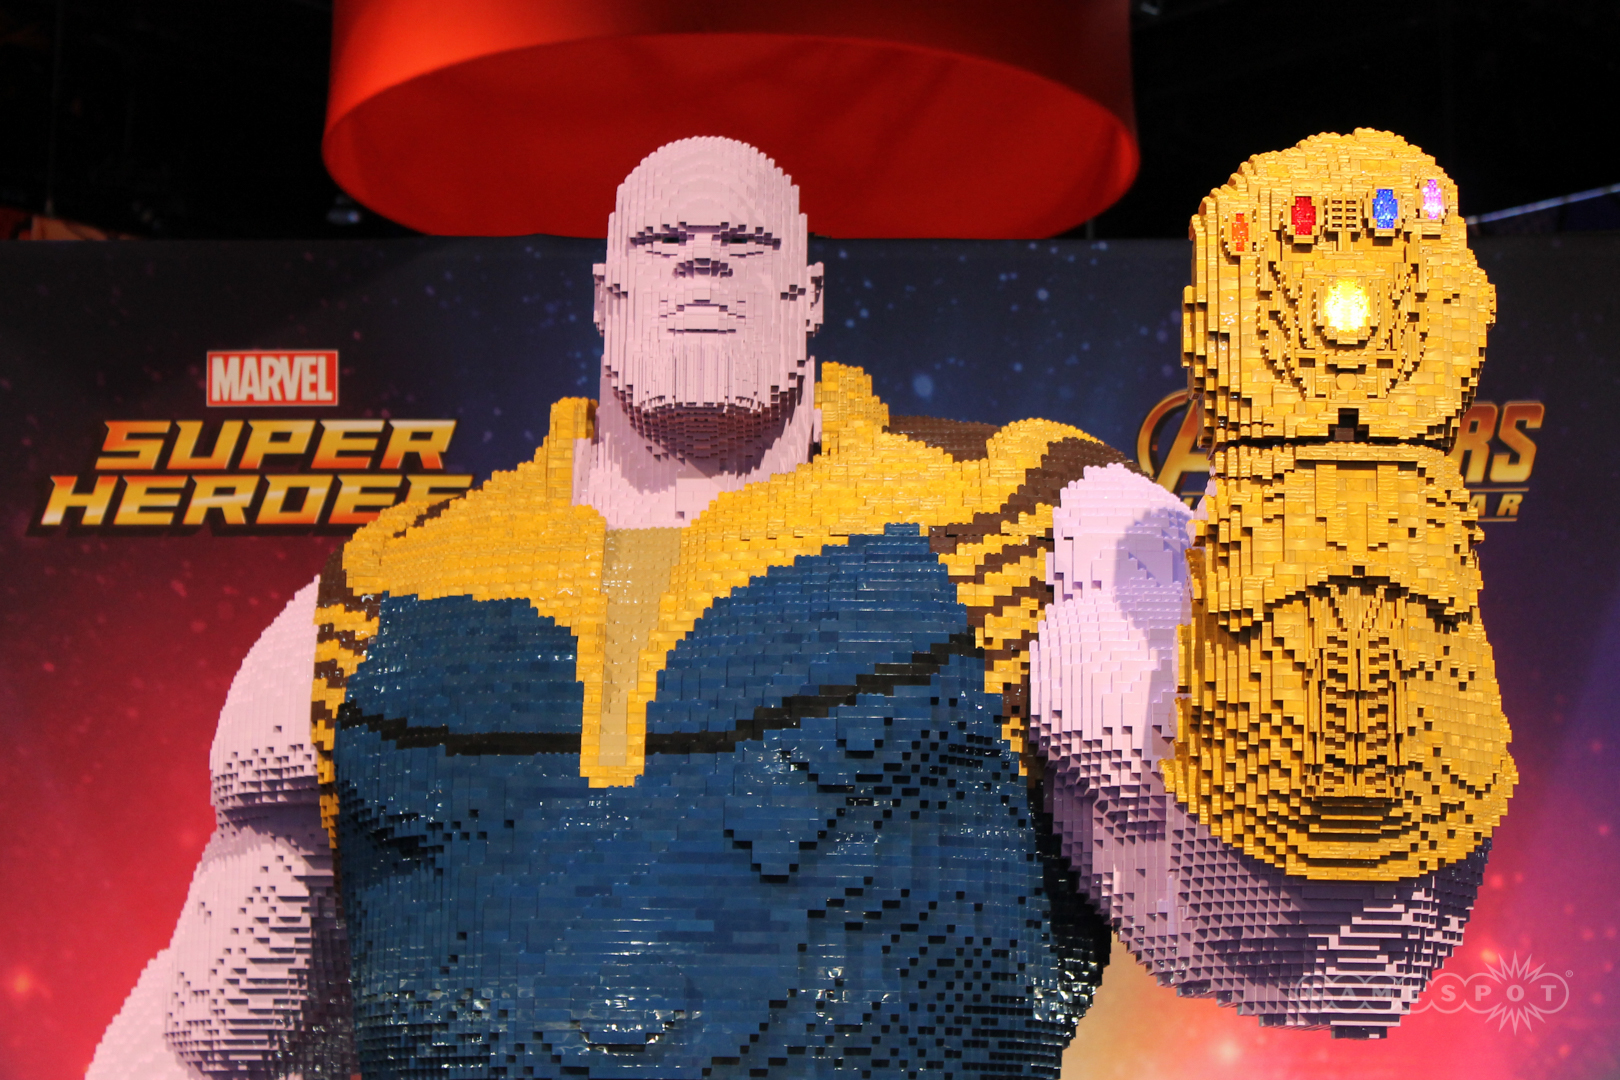 Comic-Con 2018: This Massive Lego Thanos Demands You Bow Before